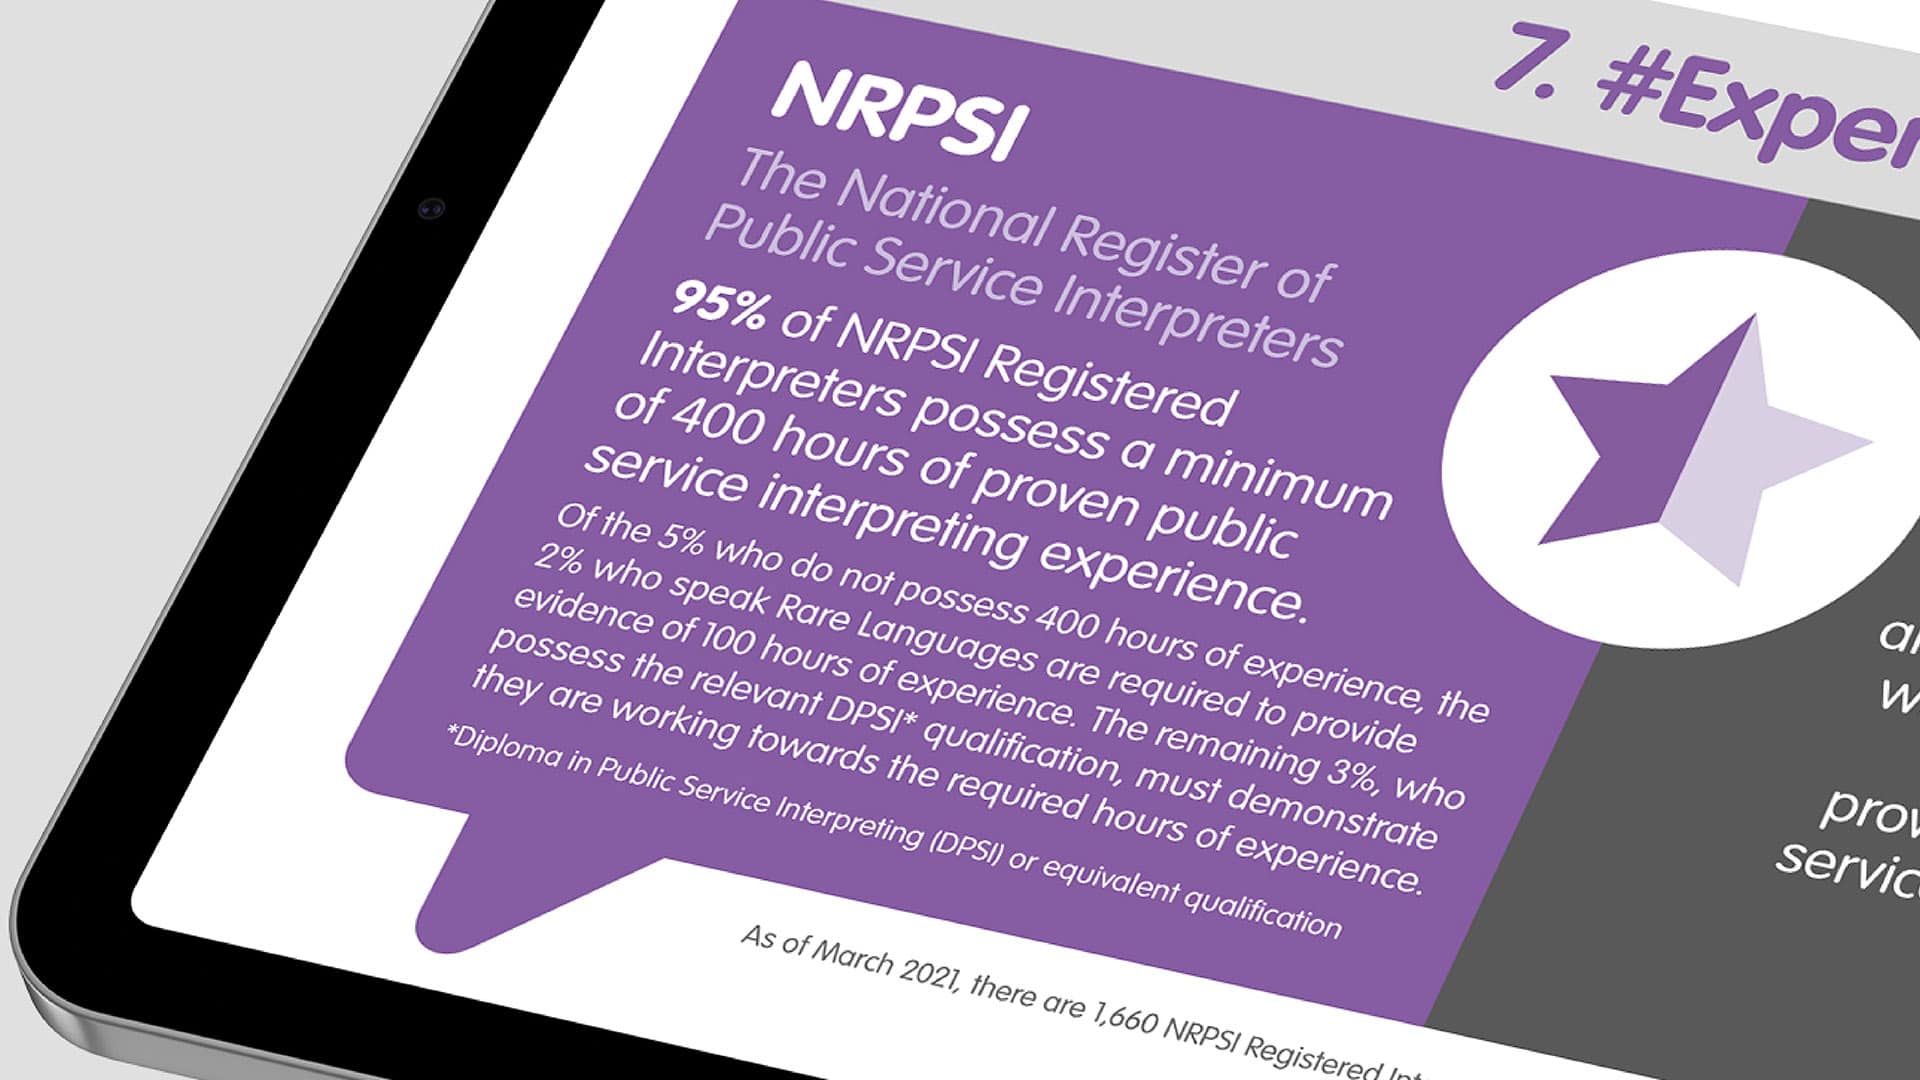 Close-up of a mobile phone displaying an illustrated graphic for the NRPSI The National Register of Public Service Interpreters website.